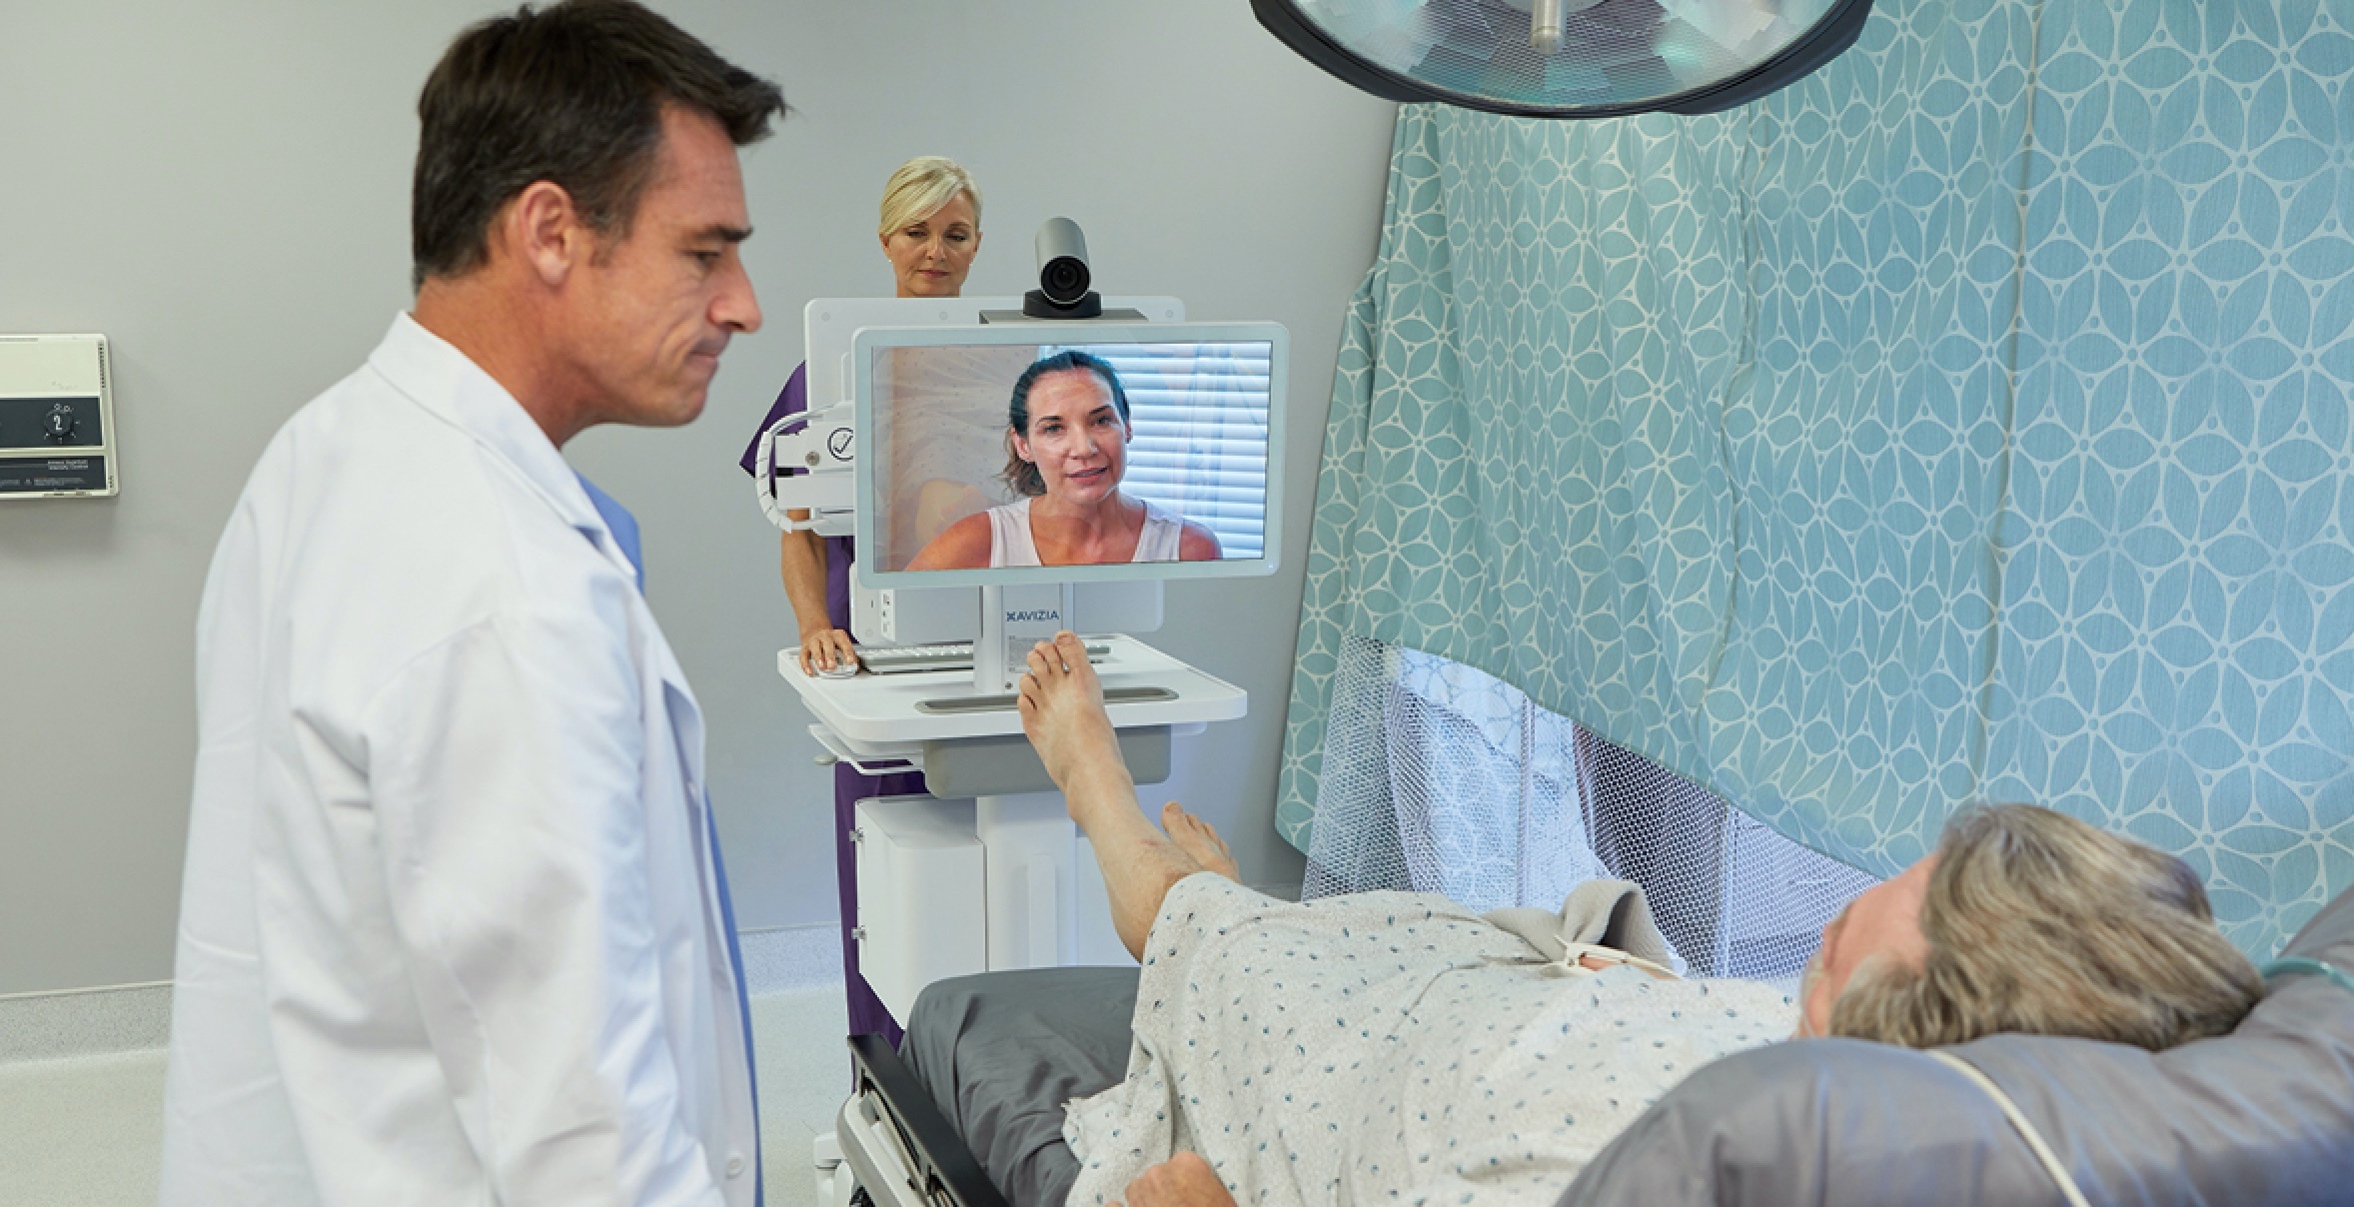 Provider facing patient in hospital bed with telemedicine cart